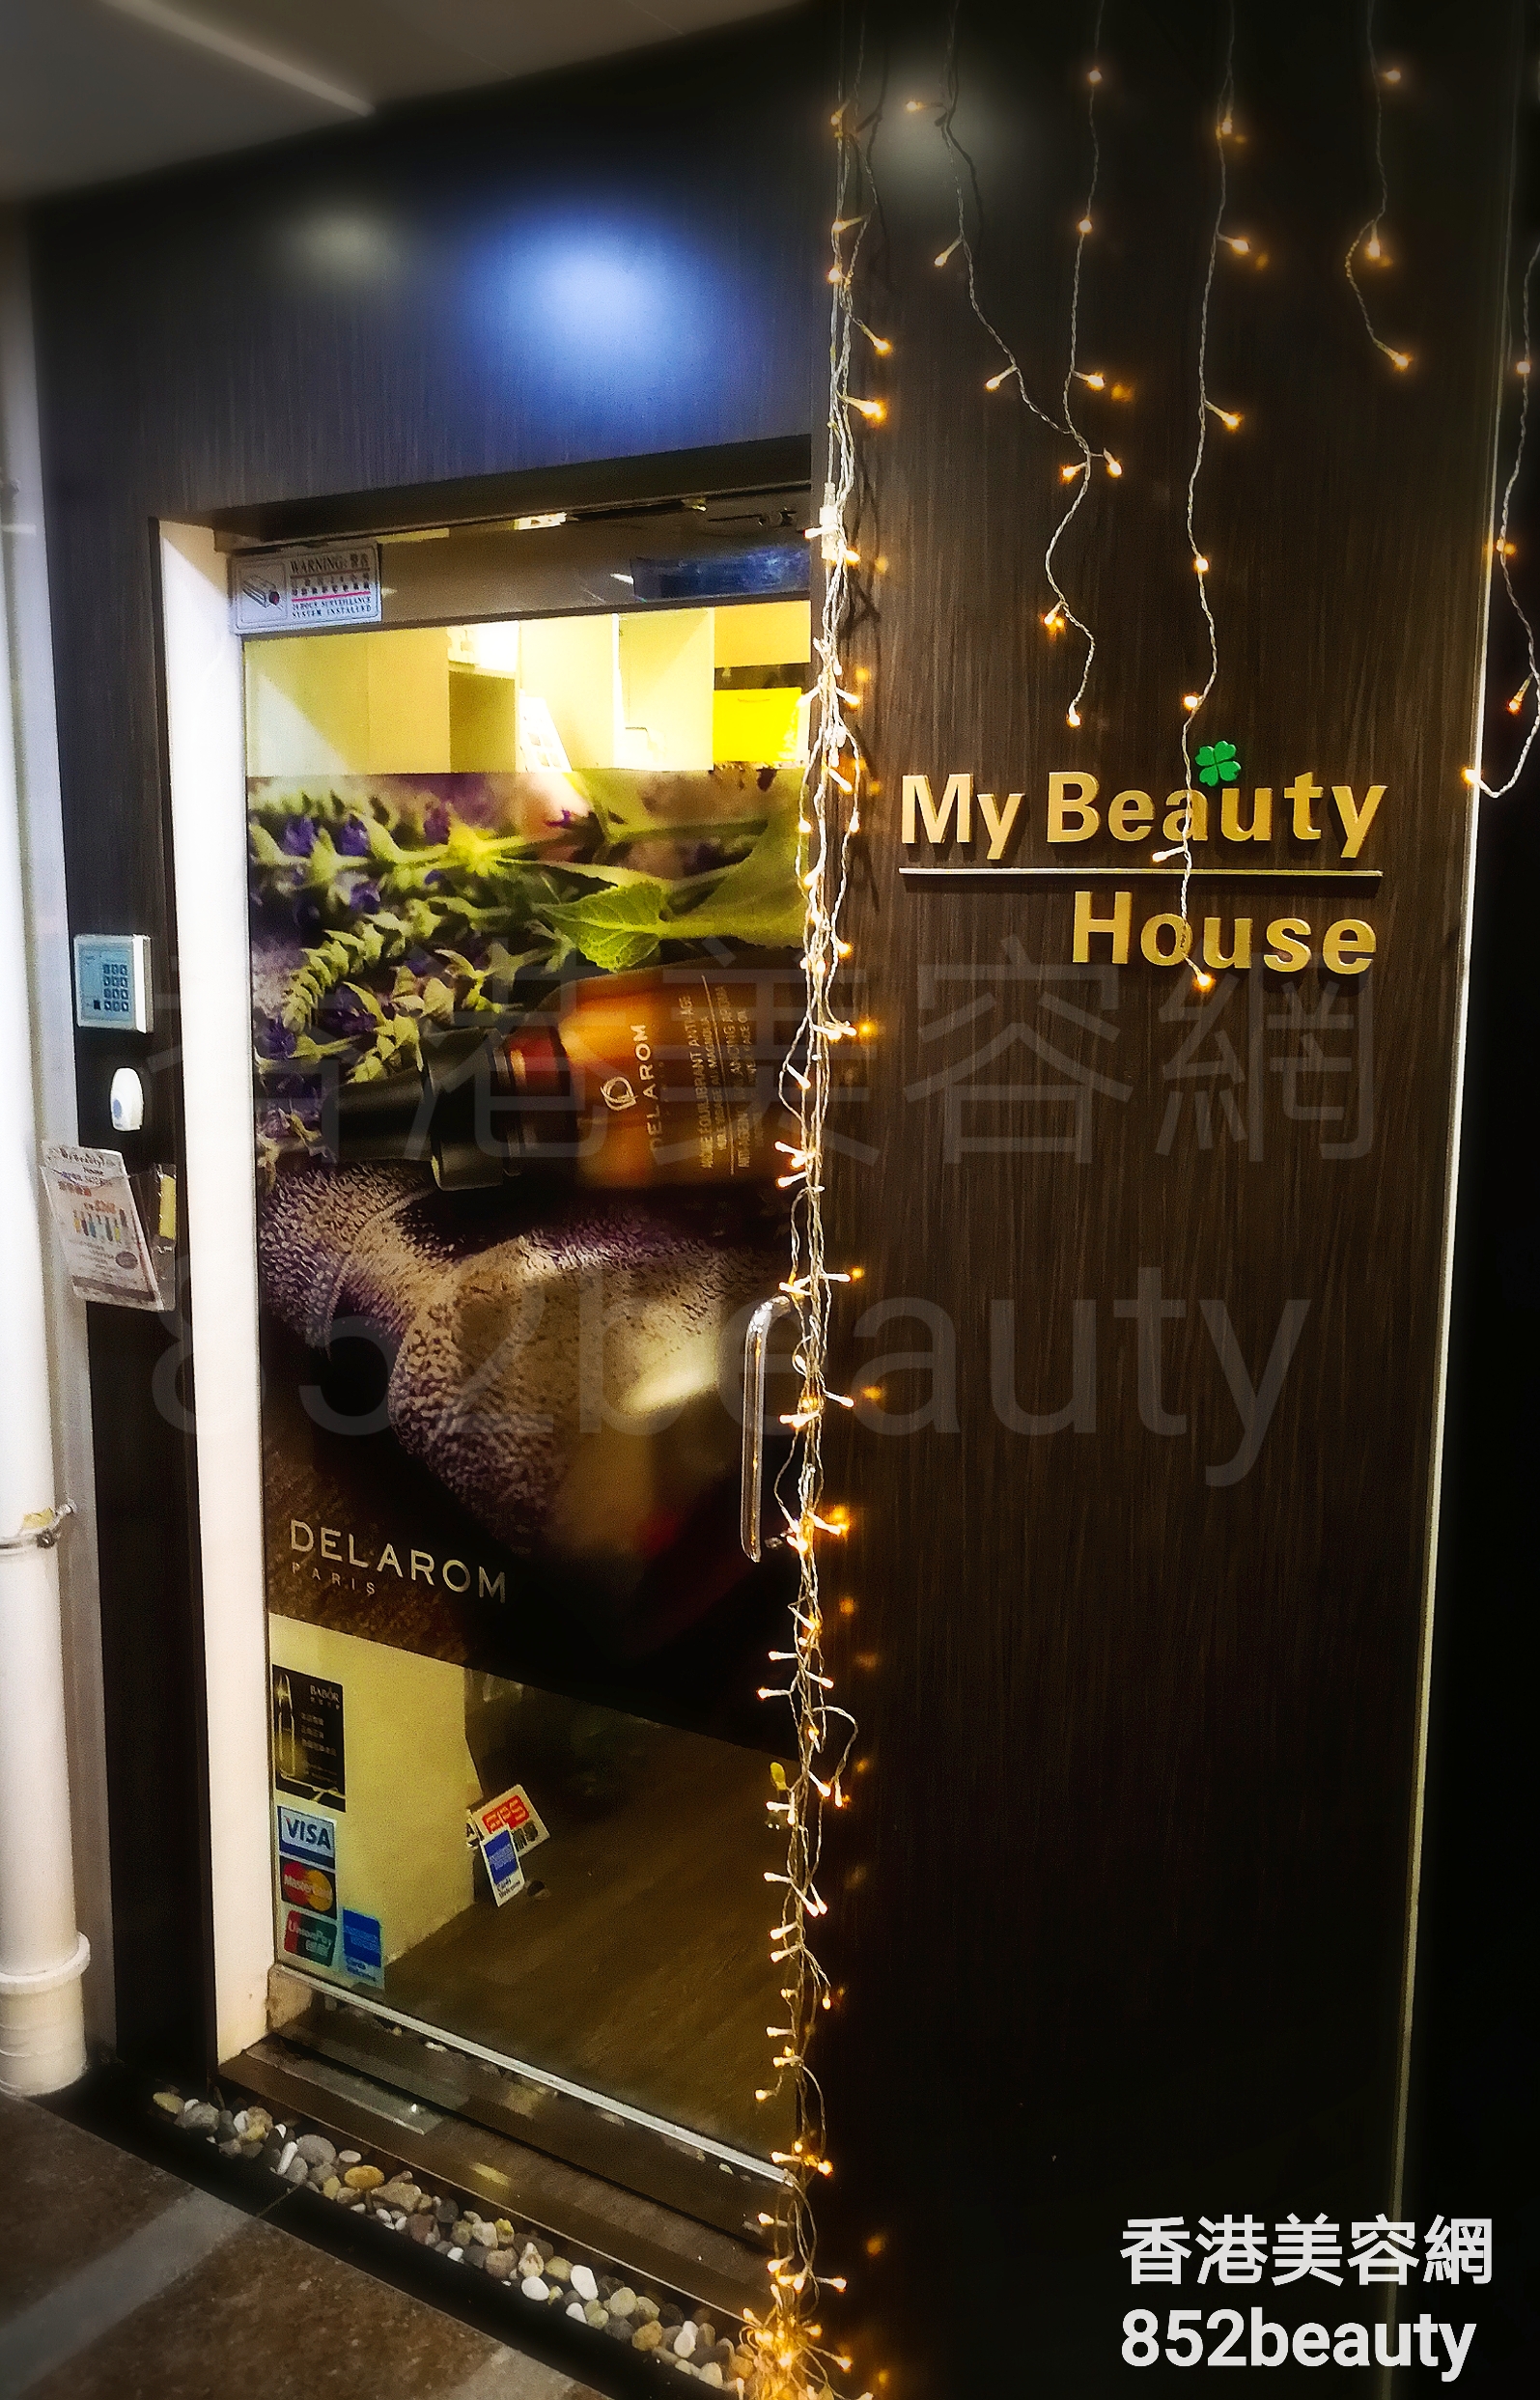 Hand and foot care: My Beauty House